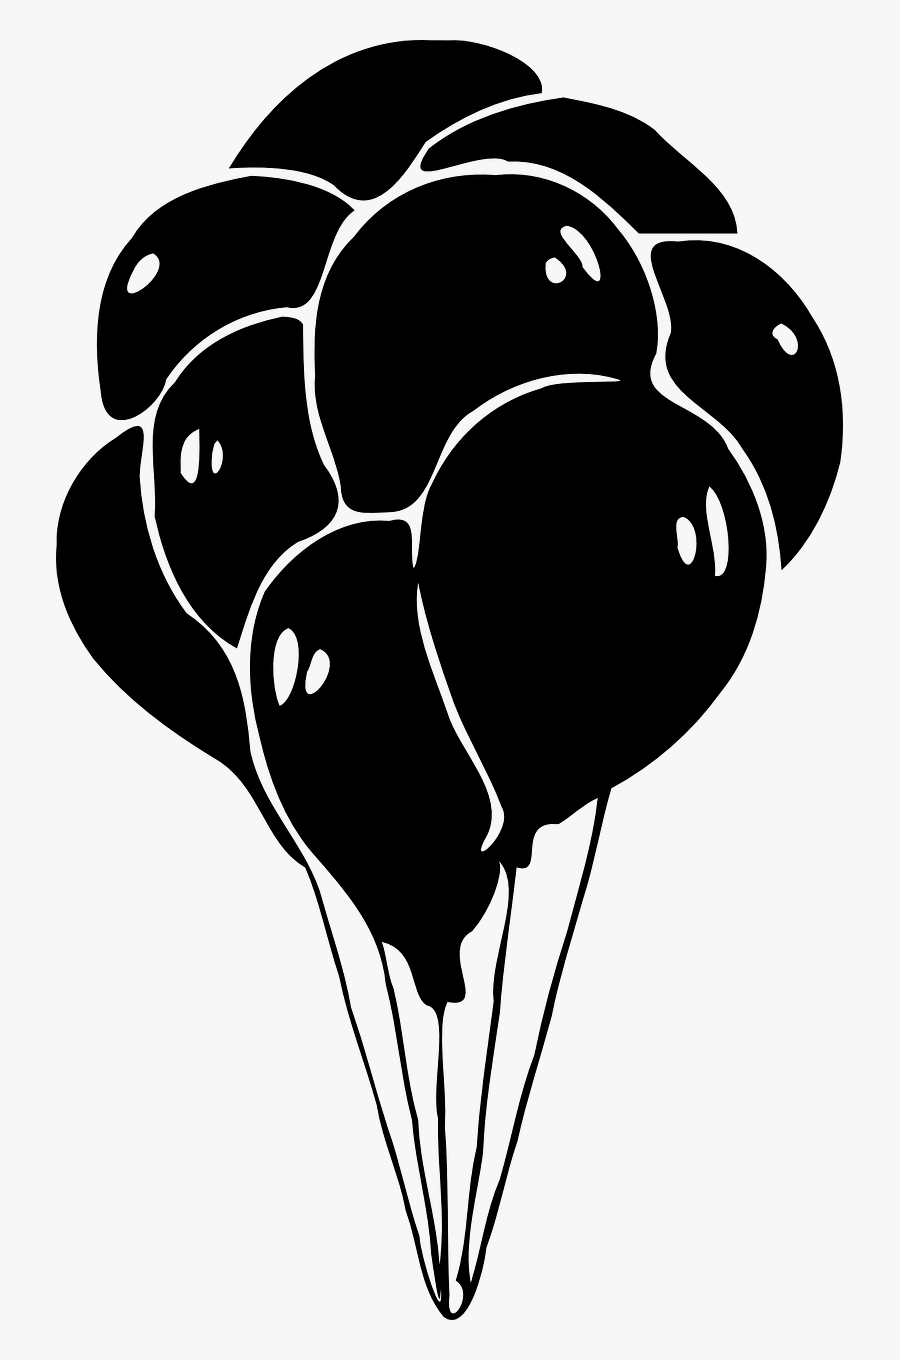 Balloons Silhouette Black Free Picture - Black Balloons Clip Art, Transparent Clipart